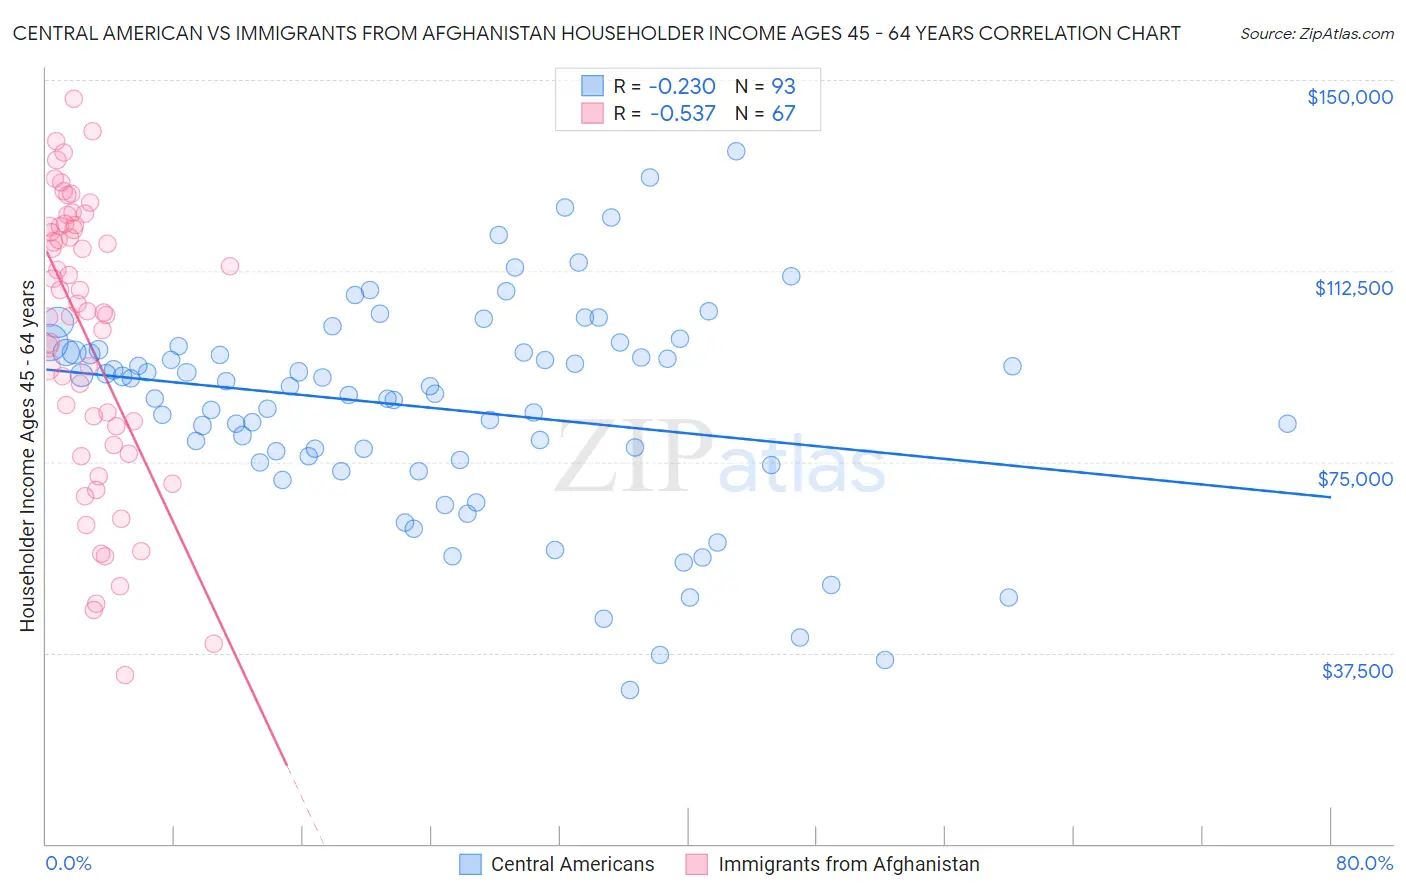 Central American vs Immigrants from Afghanistan Householder Income Ages 45 - 64 years